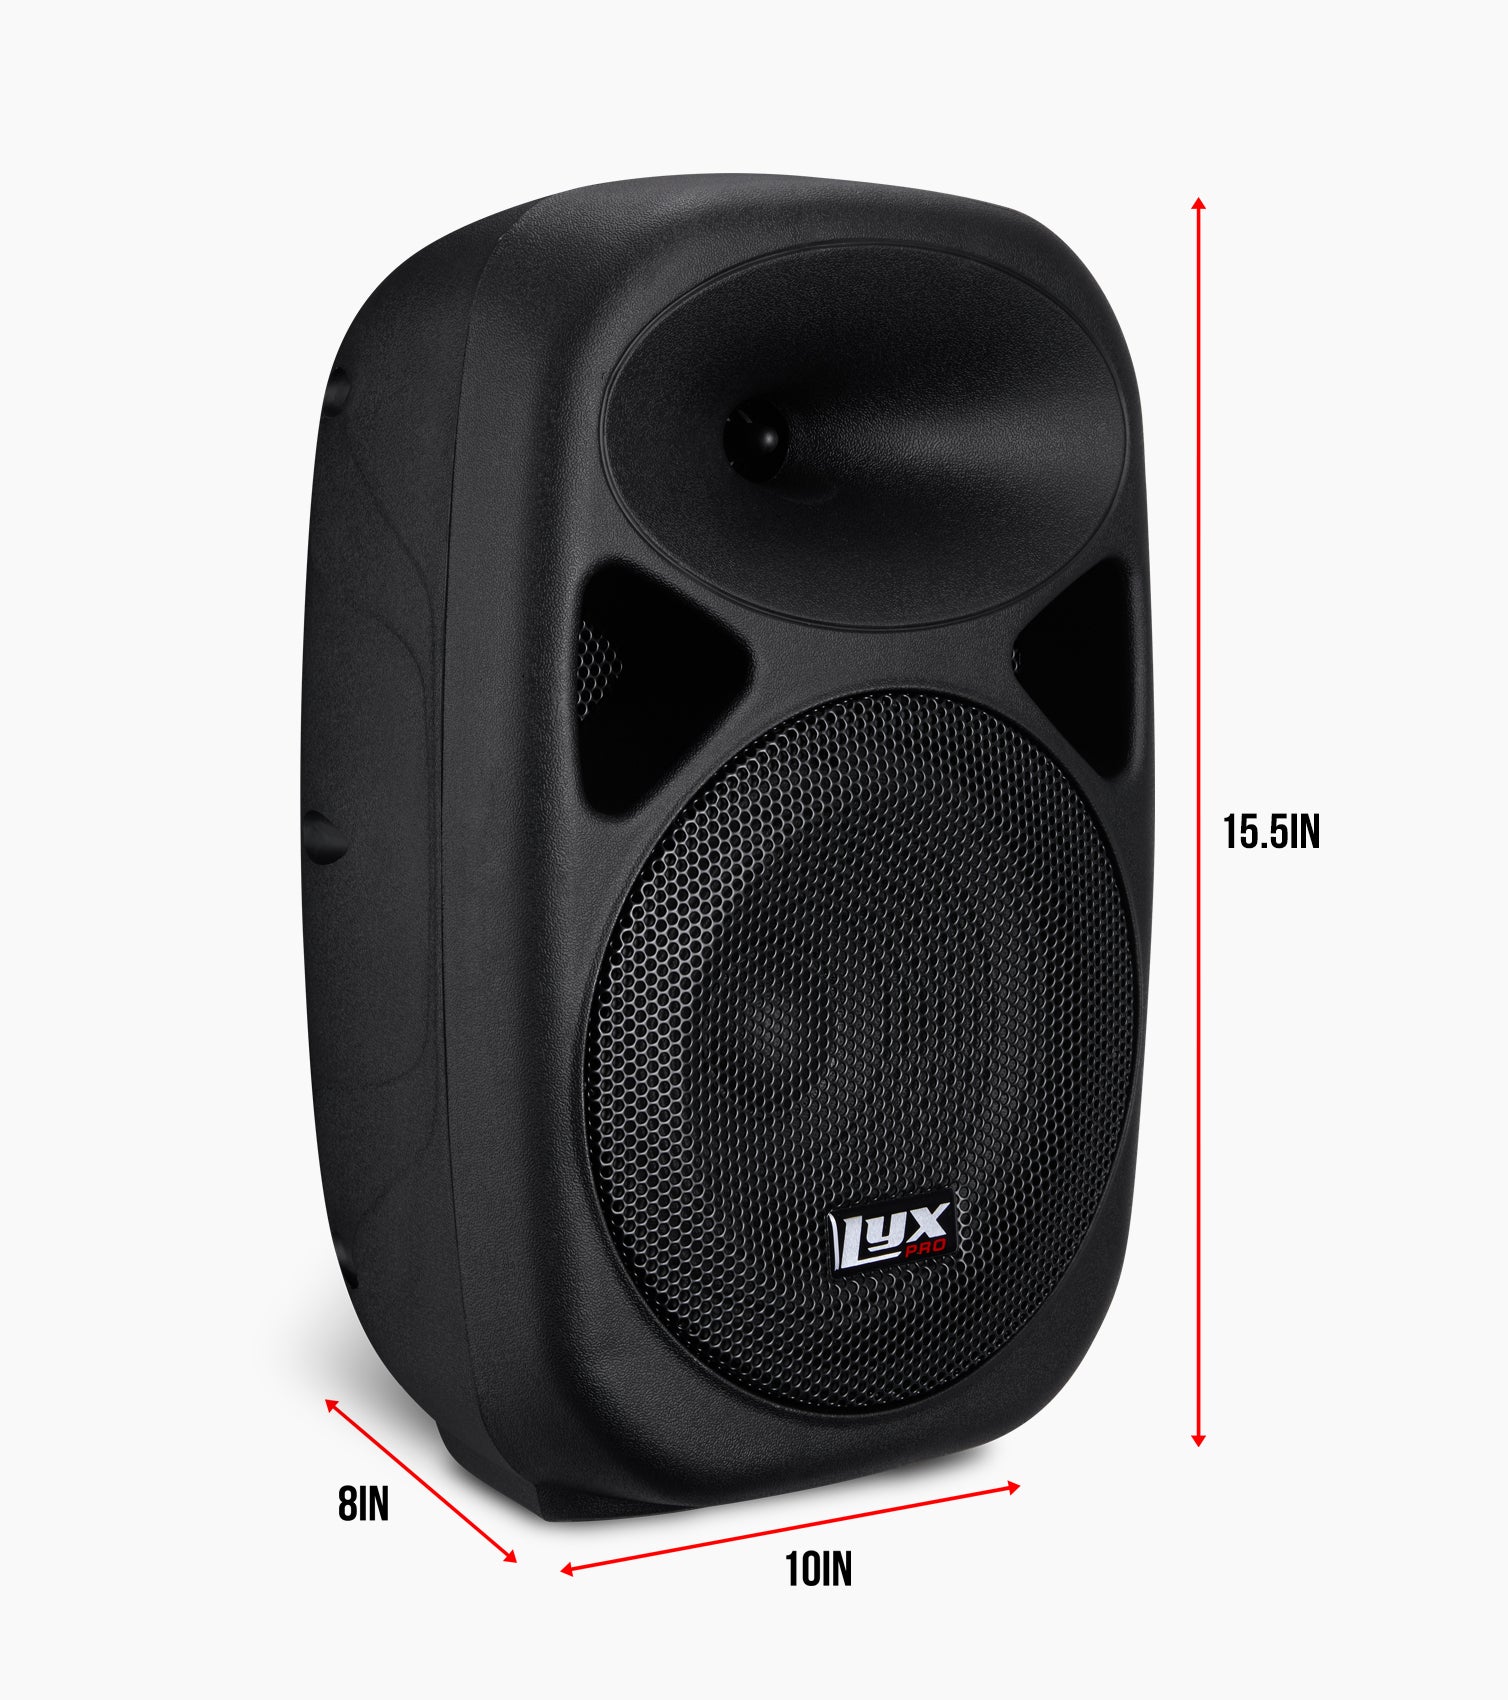 8” portable battery-powered PA speaker dimensions 